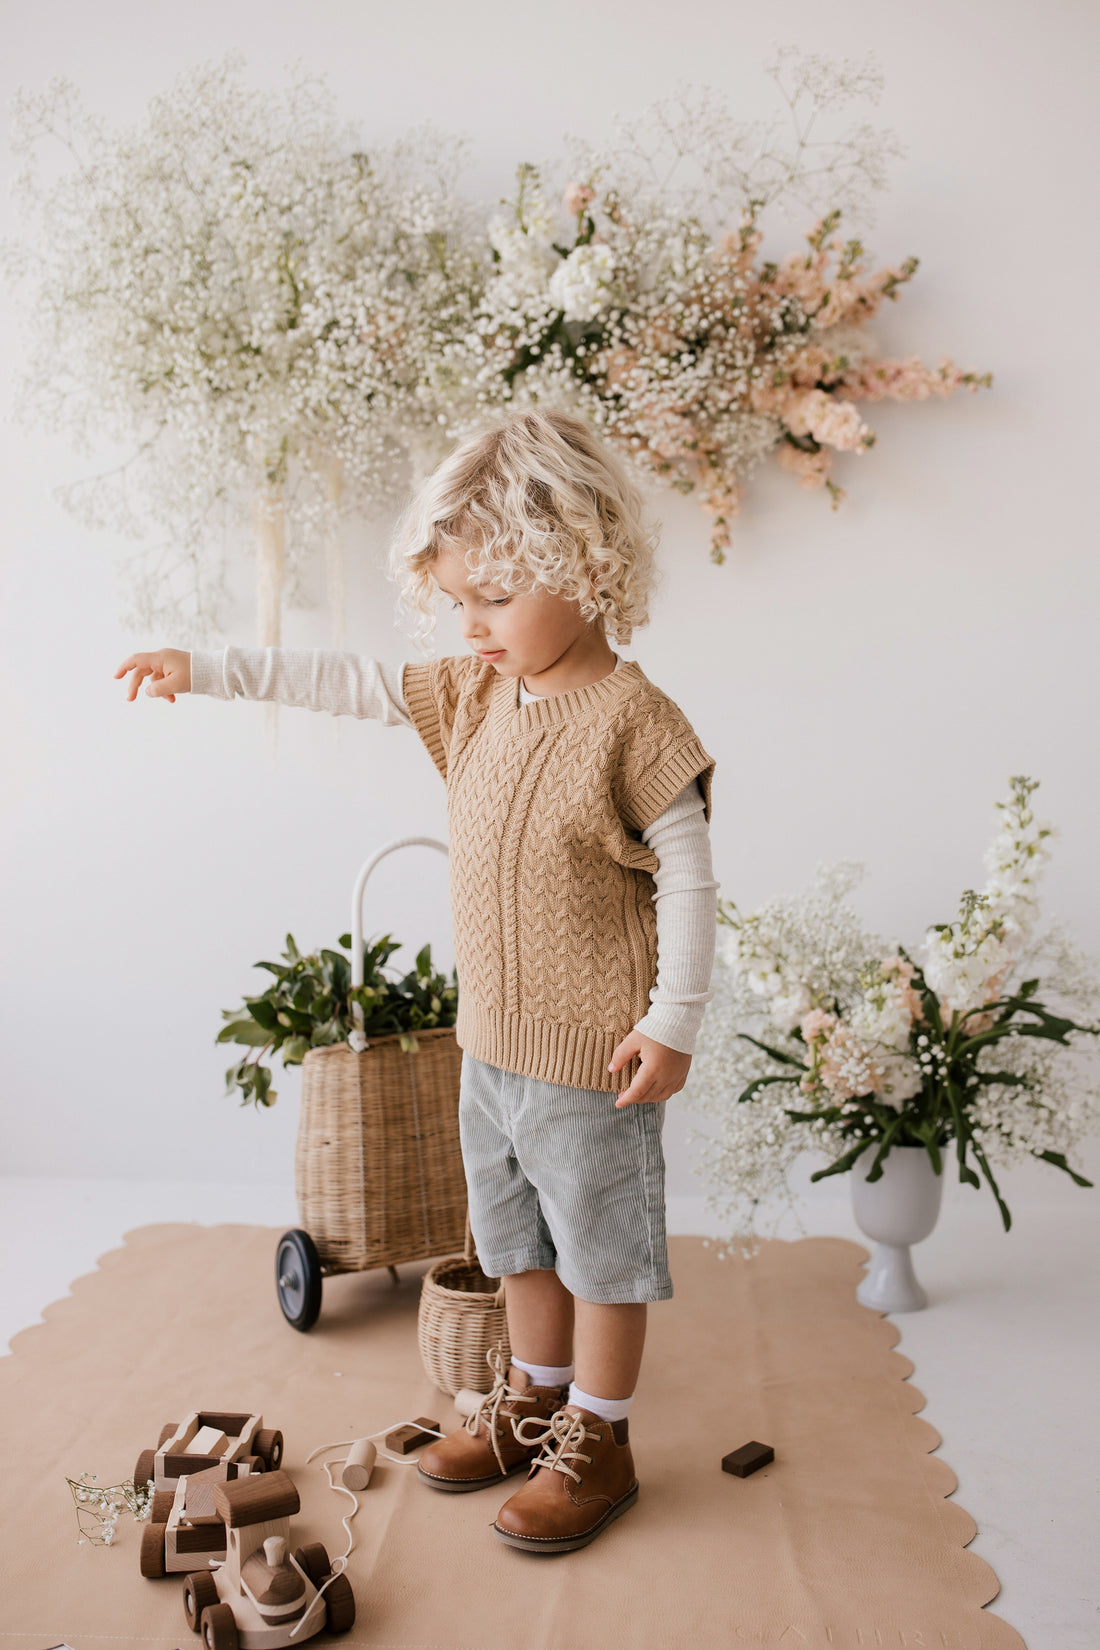 Leo Knitted Vest - Latte Marle Childrens Knitwear from Jamie Kay NZ